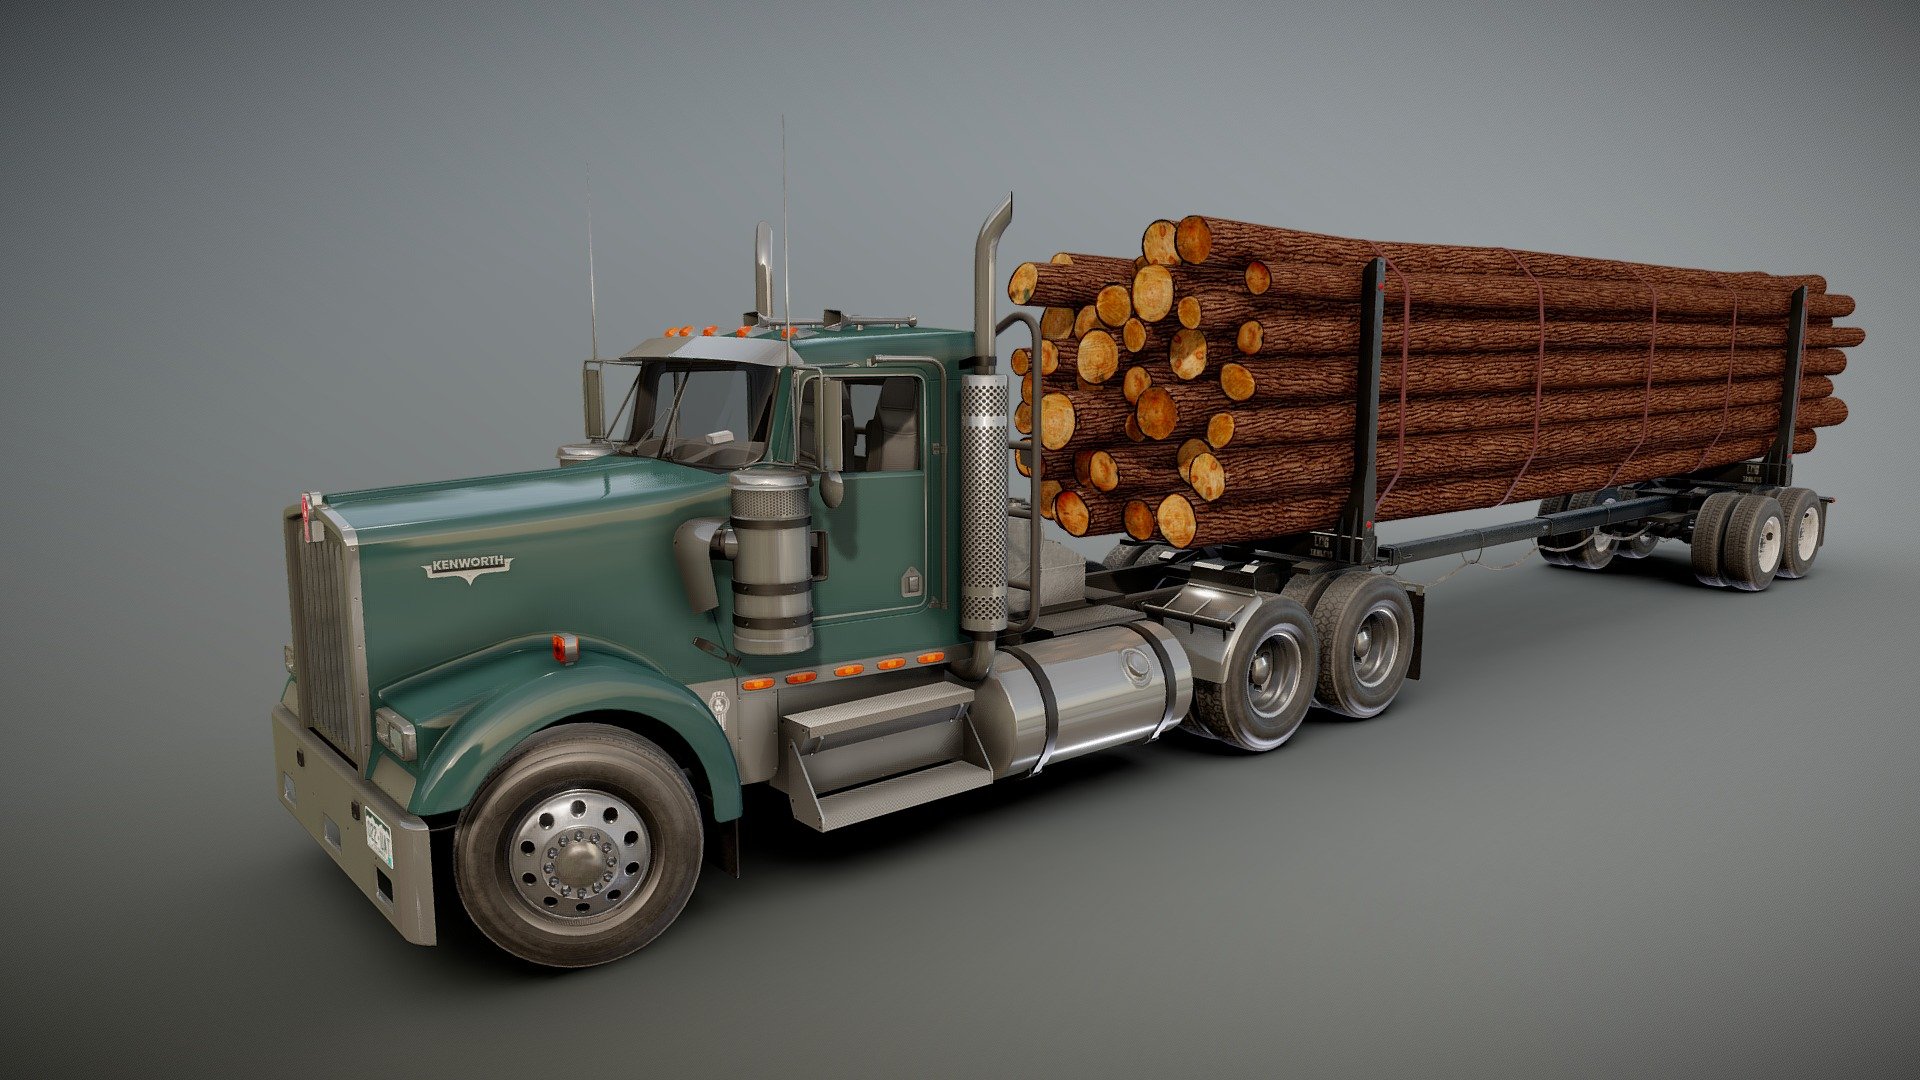 Kenworth log truck game ready model.

Full textured model with clean topology.

High accuracy exterior model

High detailed rims and tires, with PBR maps(Base_Color/Metallic/Normal/Roughness.png2048x2048 )

Different tires for rear and front wheels.

Different wheels for rig and log trailer.

High detailed cabin - seams, rivets, chrome parts, wipers and etc.

Lowpoly interior - 1811 tris 1074 verts.

Wheels - 20774 tris 11352 verts.

Truck model - 65644 tris 38033 verts.

Full model - 95248 tris 55065 verts.

Original scale.

Truck size

Lenght 9.3m , width 3.16m , height 4.1m.

Full size

Lenght 25.1m , width 3m , height 4.3m.

Model ready for real-time apps, games, virtual reality and augmented reality.

Asset looks accuracy and realistic and become a good part of your project 3d model